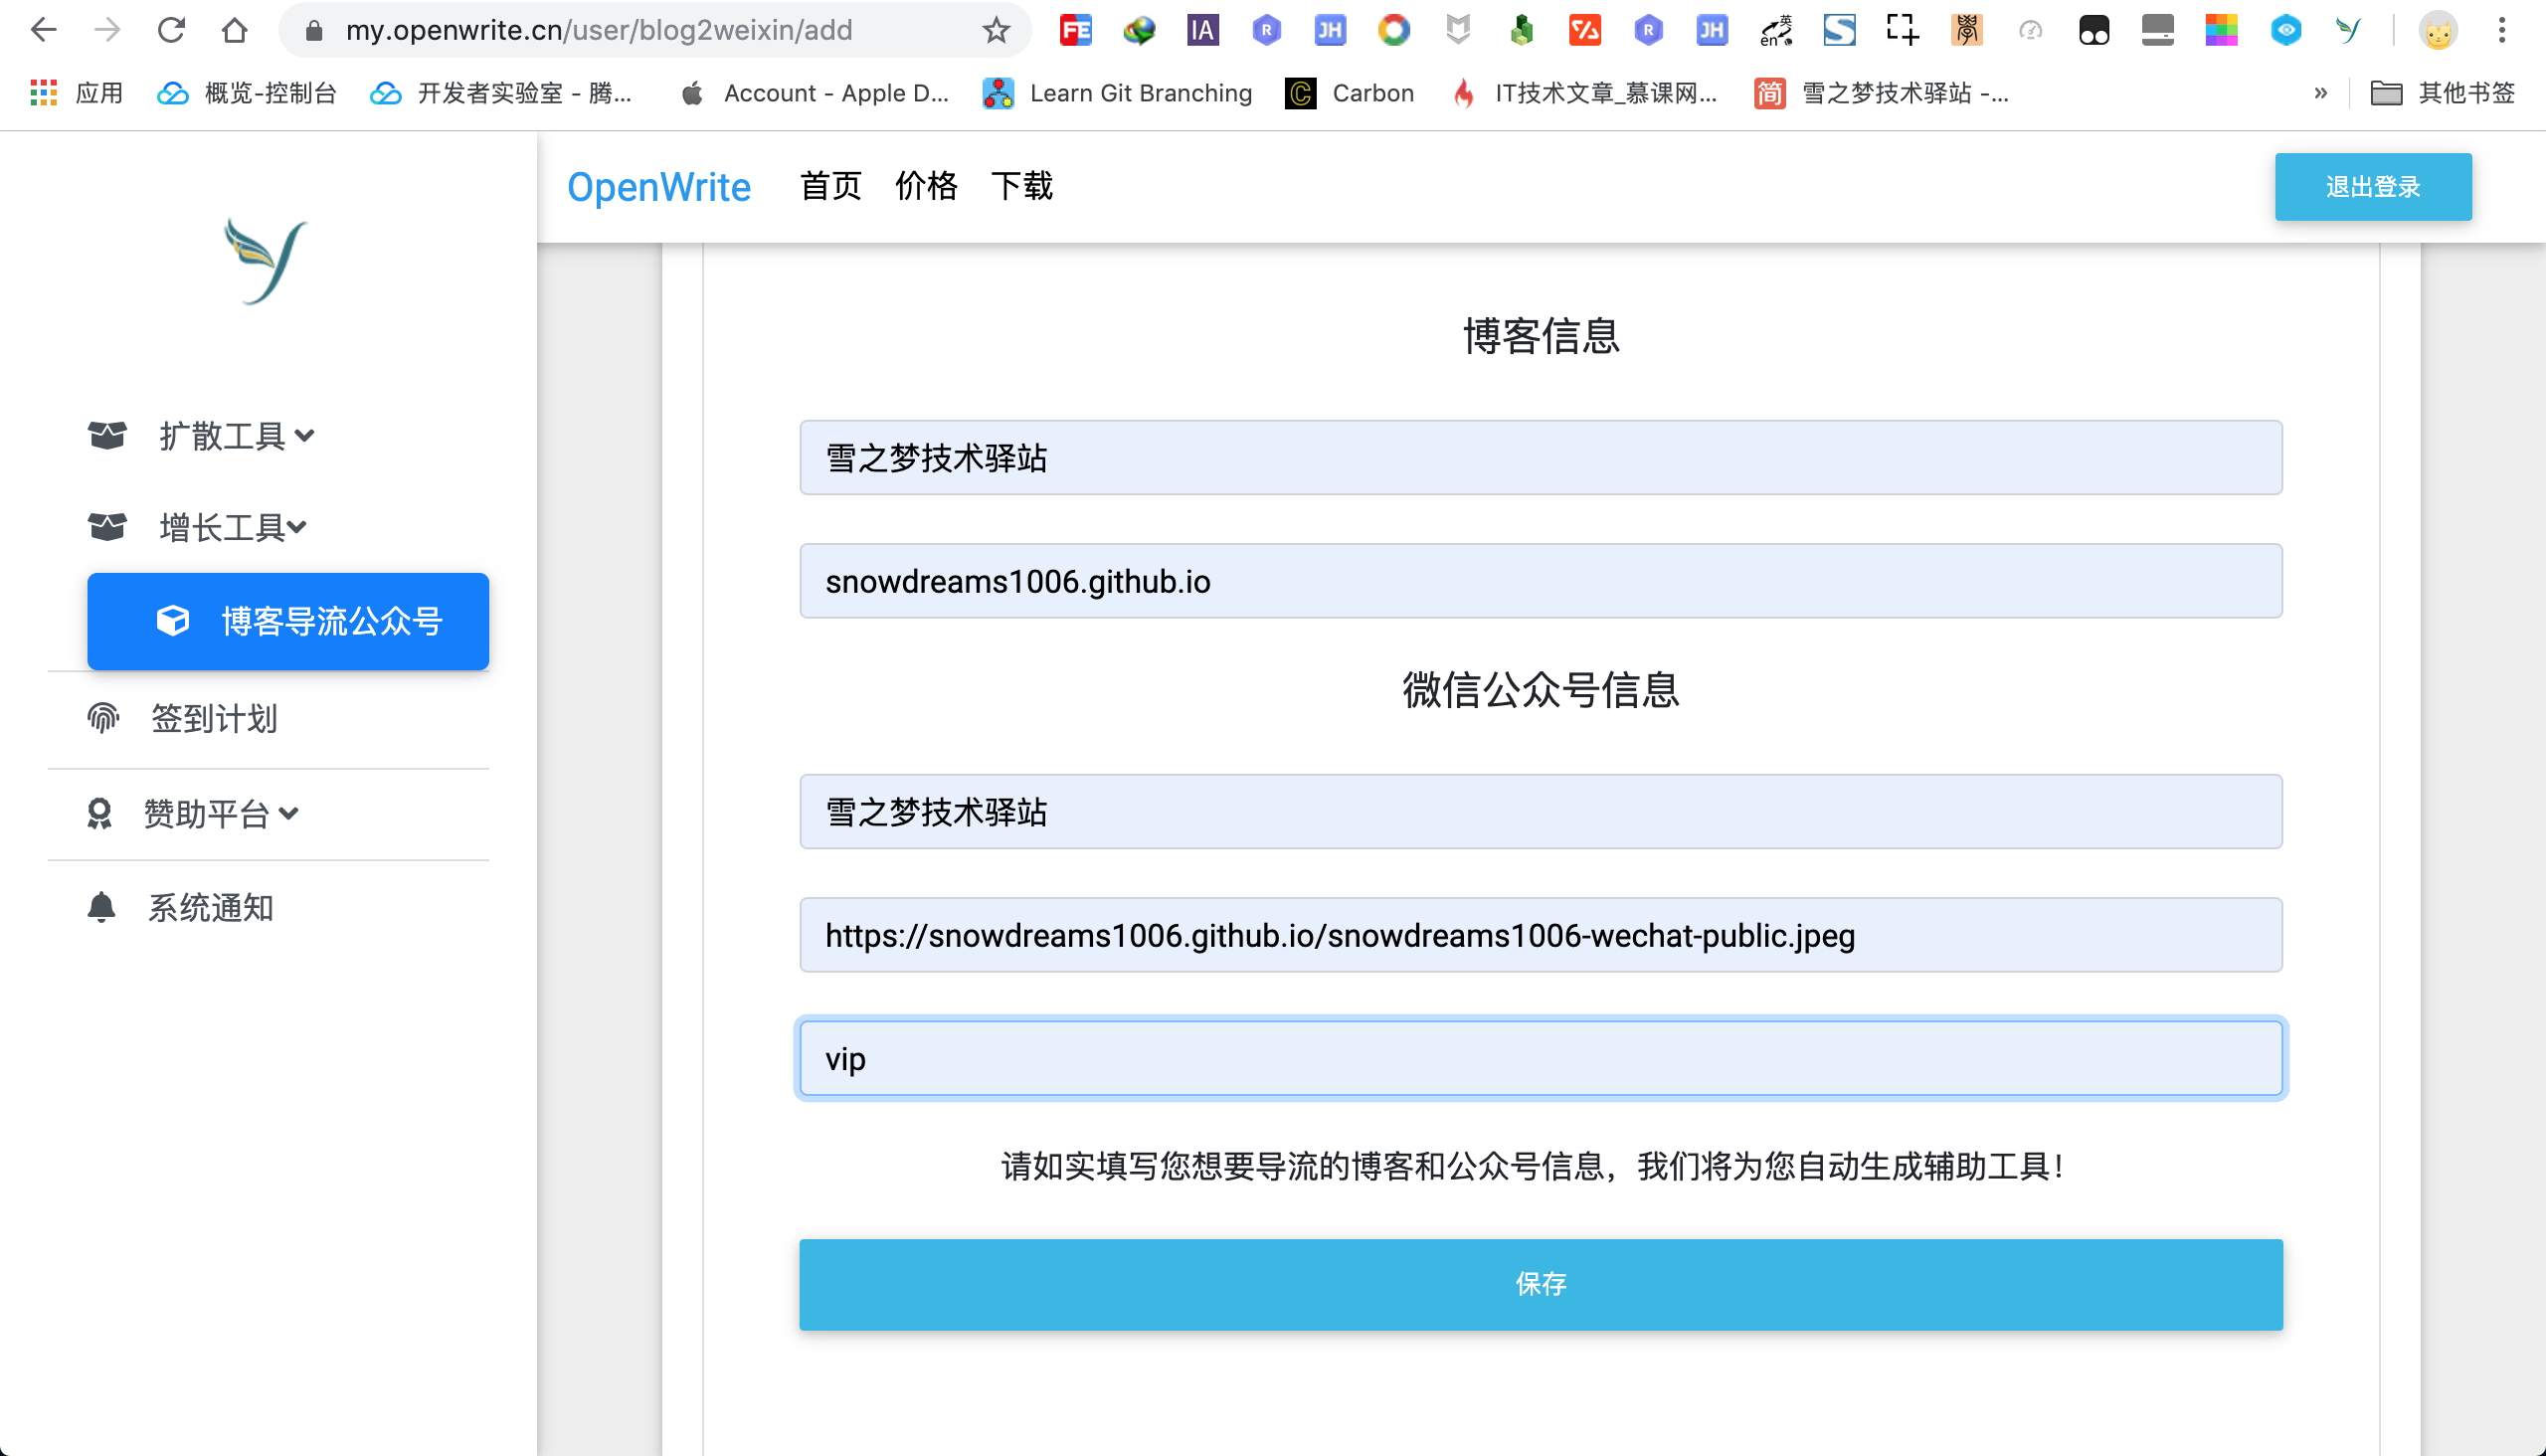 gitbook-openwrite-blog2weixin-preview.png